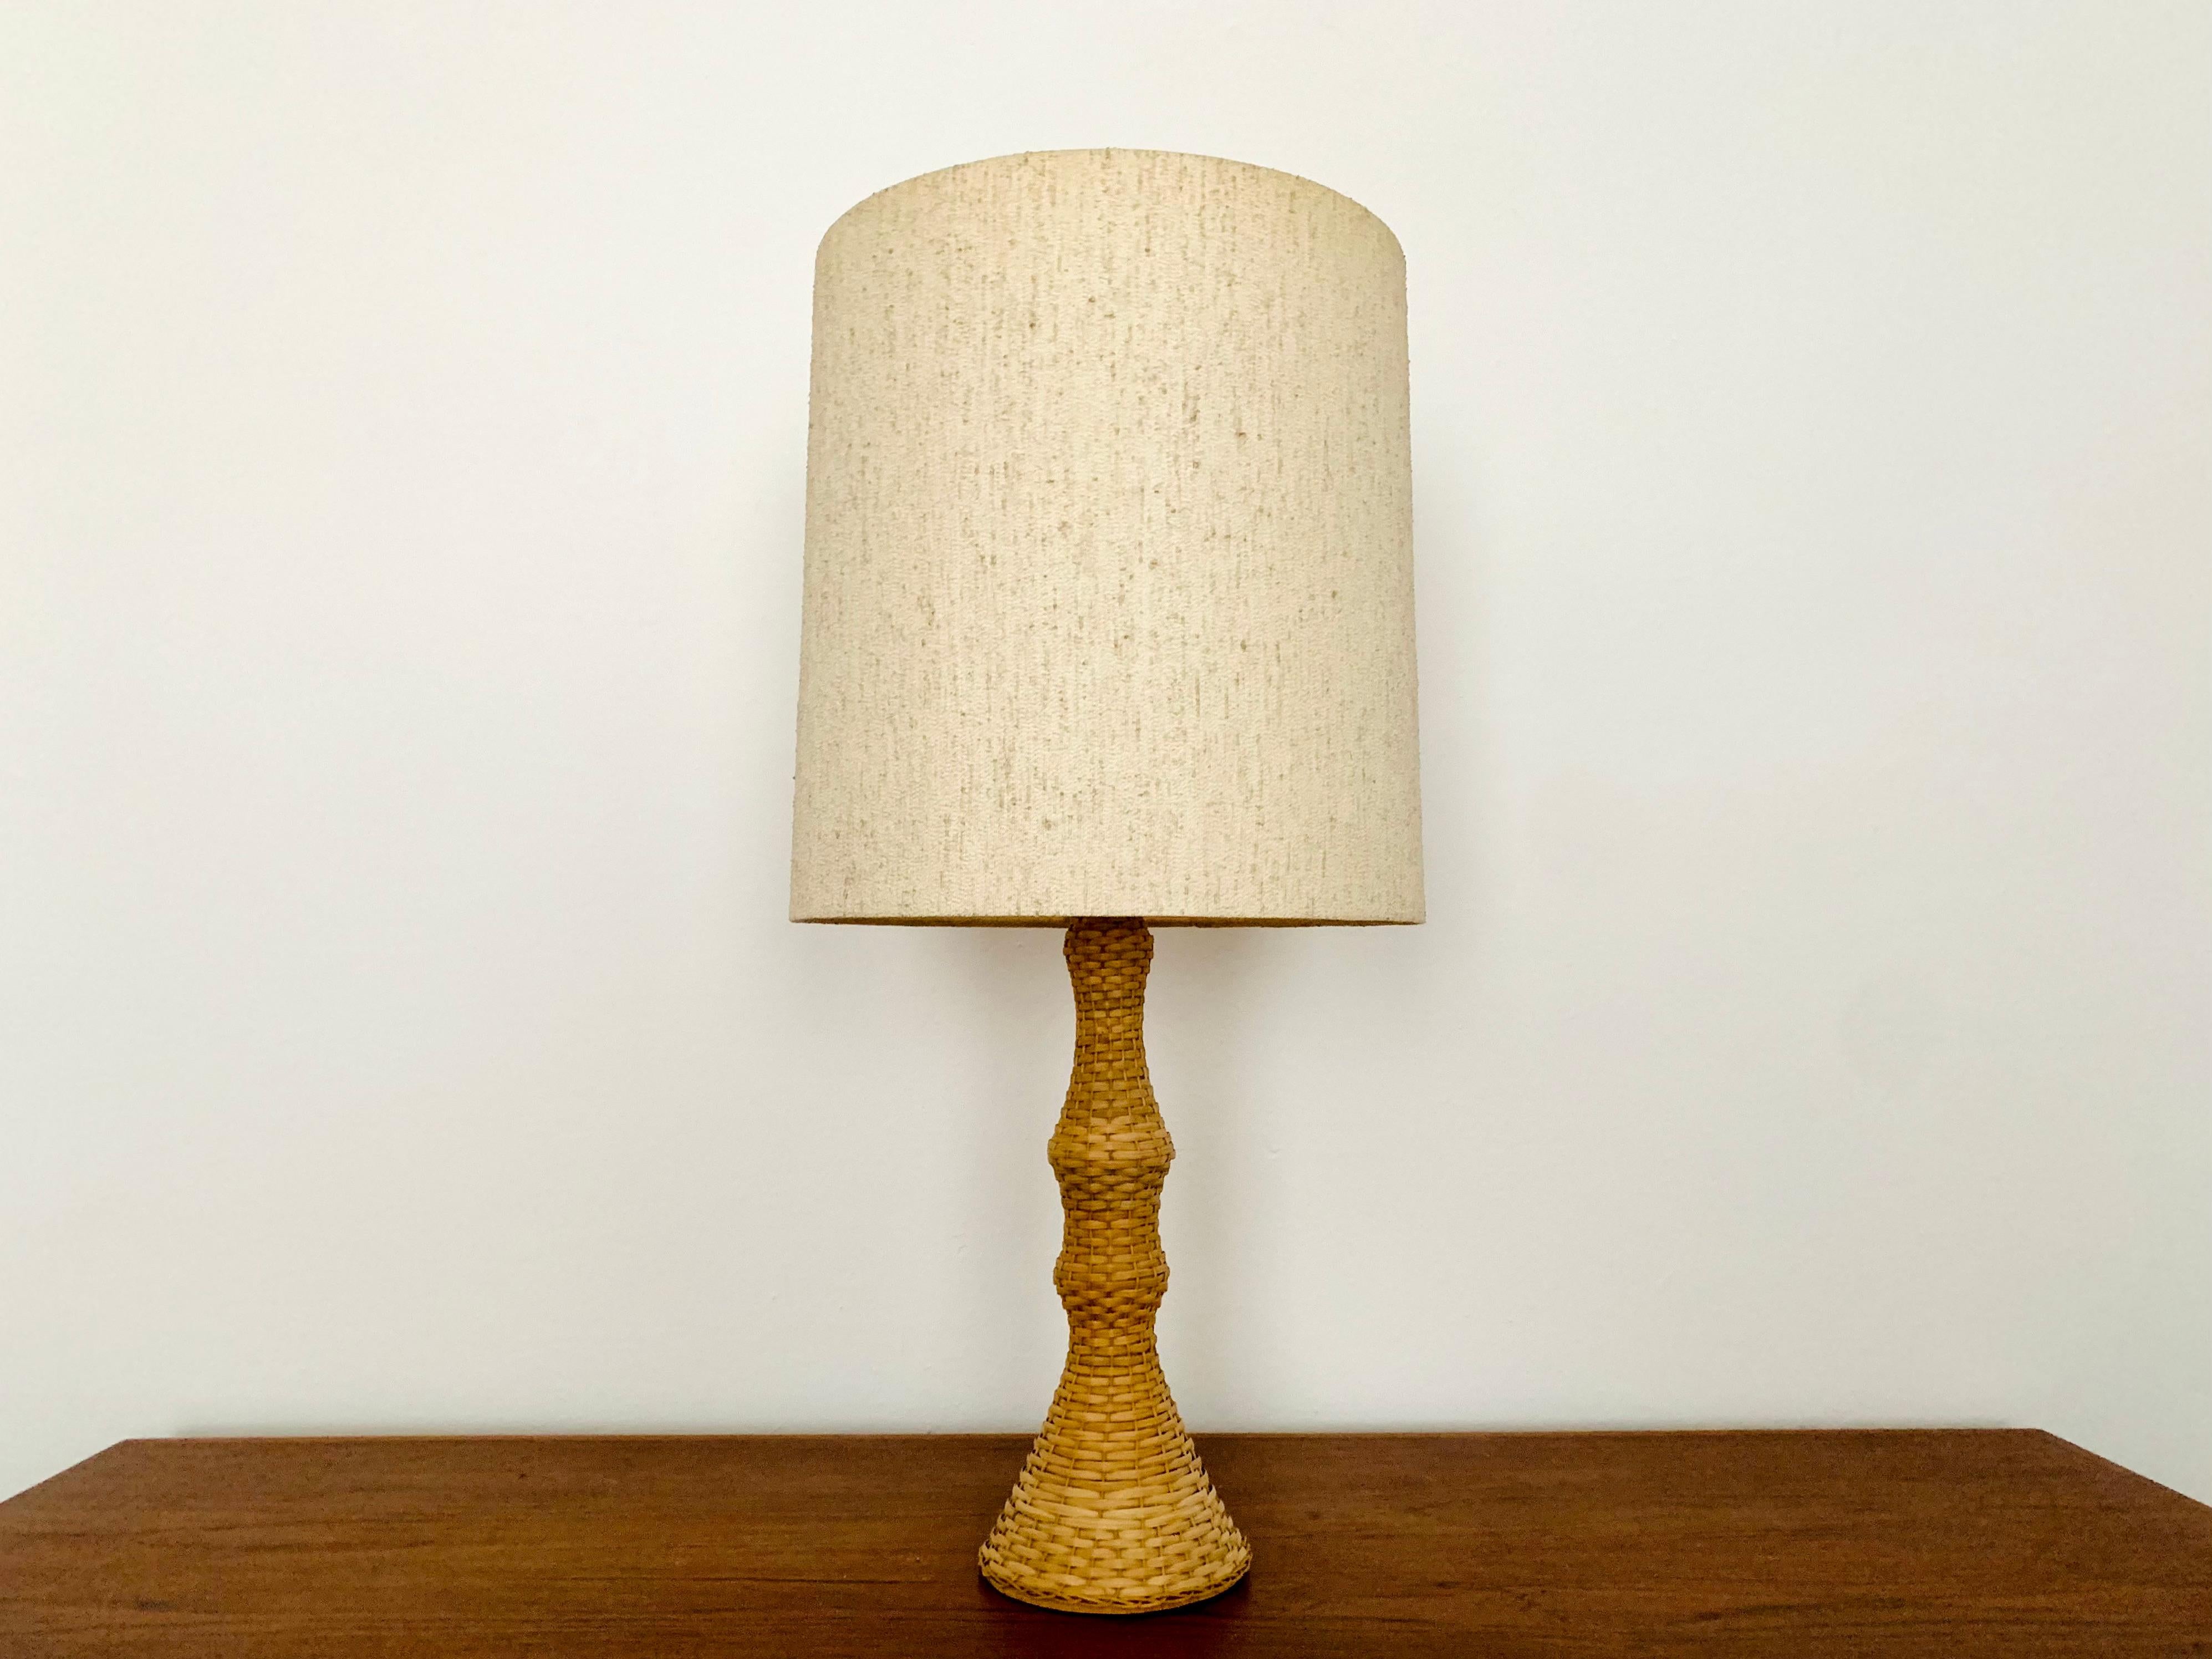 Wonderful table lamp from the 1950s.
Extraordinary design with a fantastically comfortable look.
The materials create a cozy light.

Condition:

Very good vintage condition with slight signs of wear consistent with age.
Minimal patina and